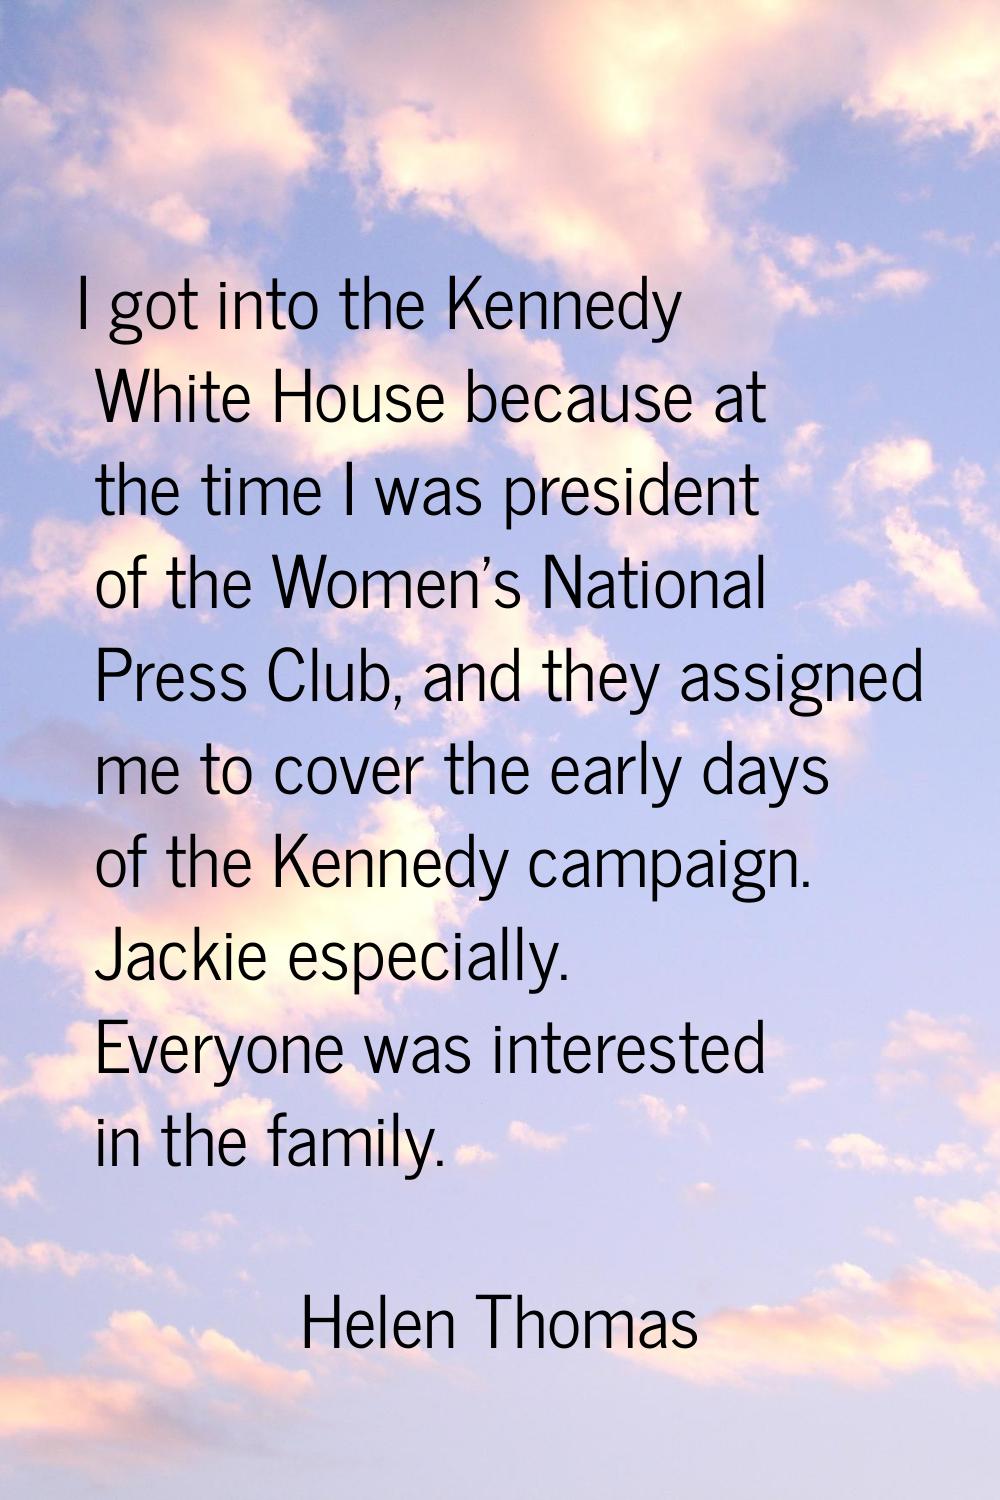 I got into the Kennedy White House because at the time I was president of the Women's National Pres